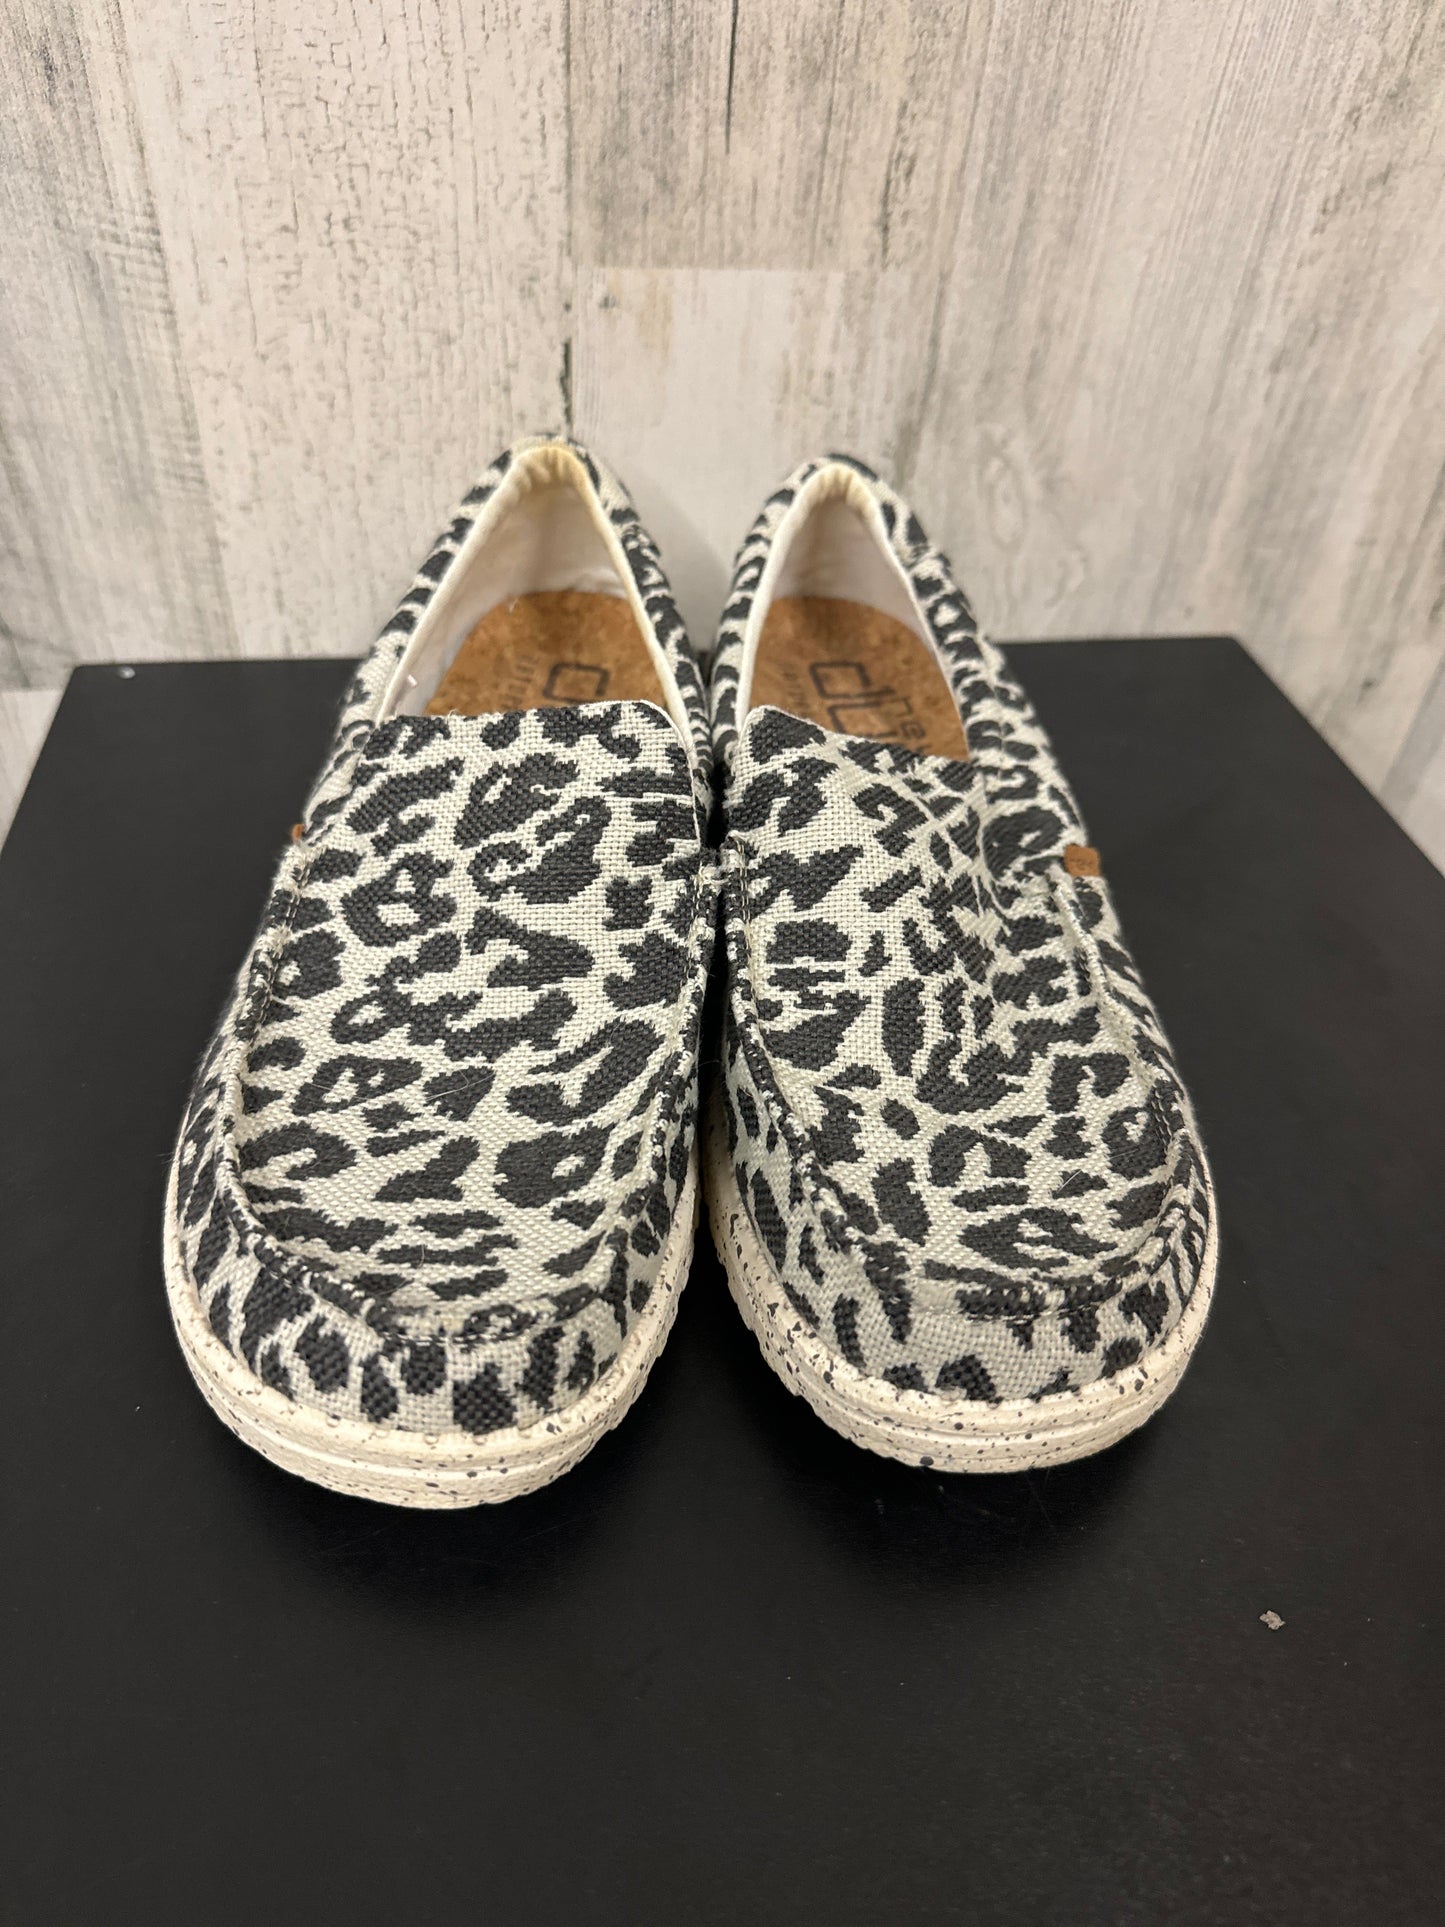 Animal Print Shoes Flats Hey Dude, Size 8